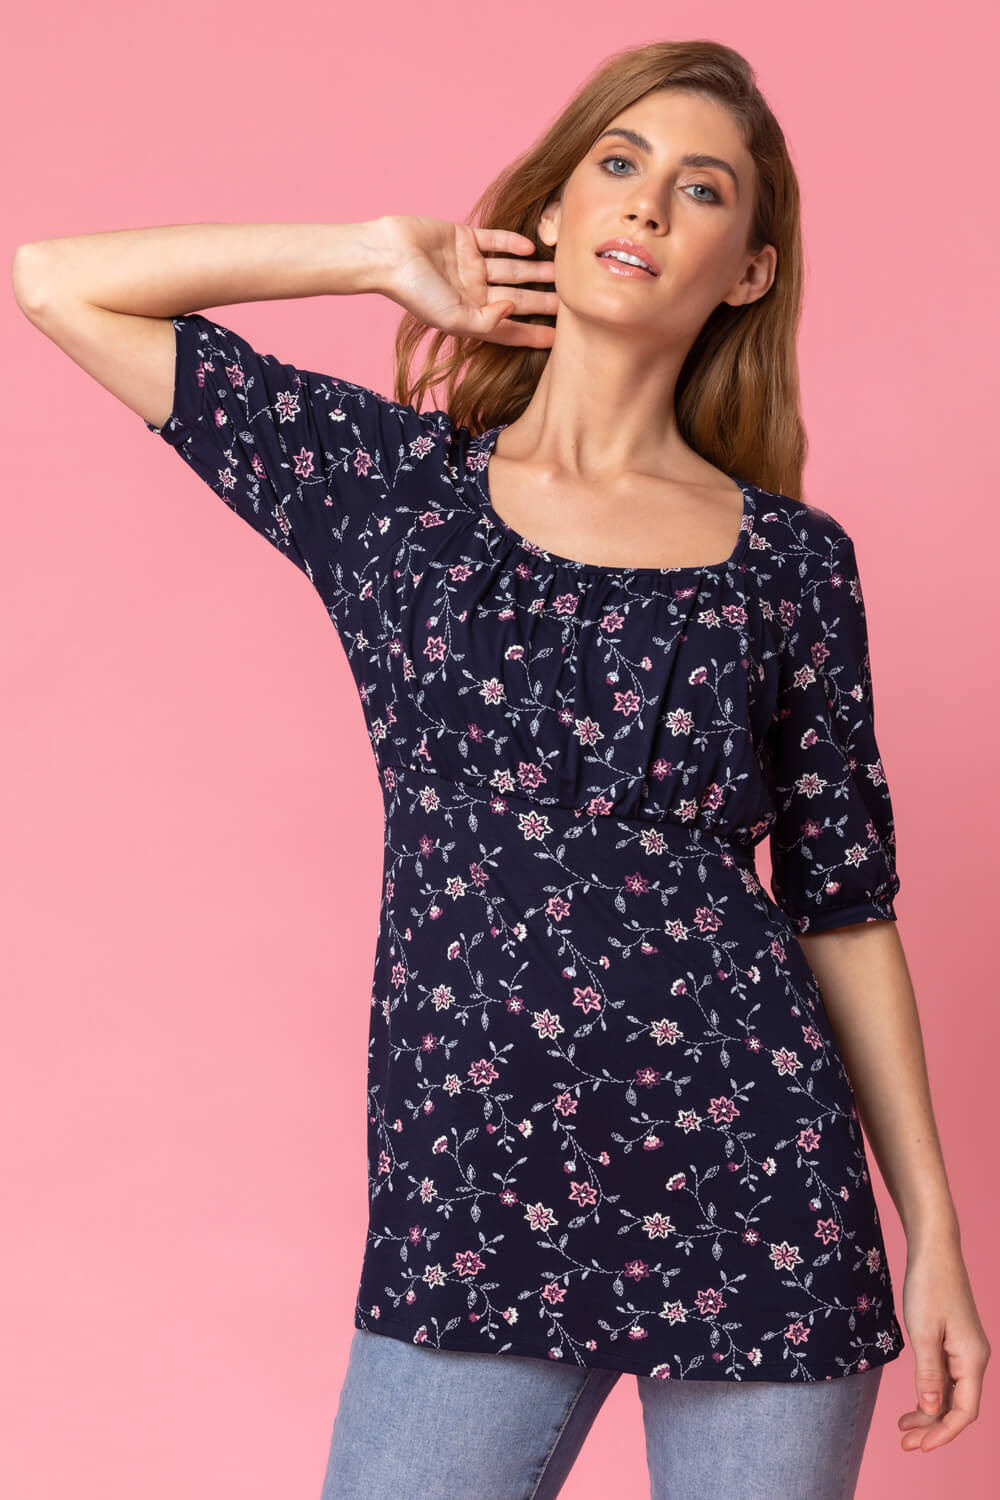 Floral Print 3/4 Sleeve Jersey Top